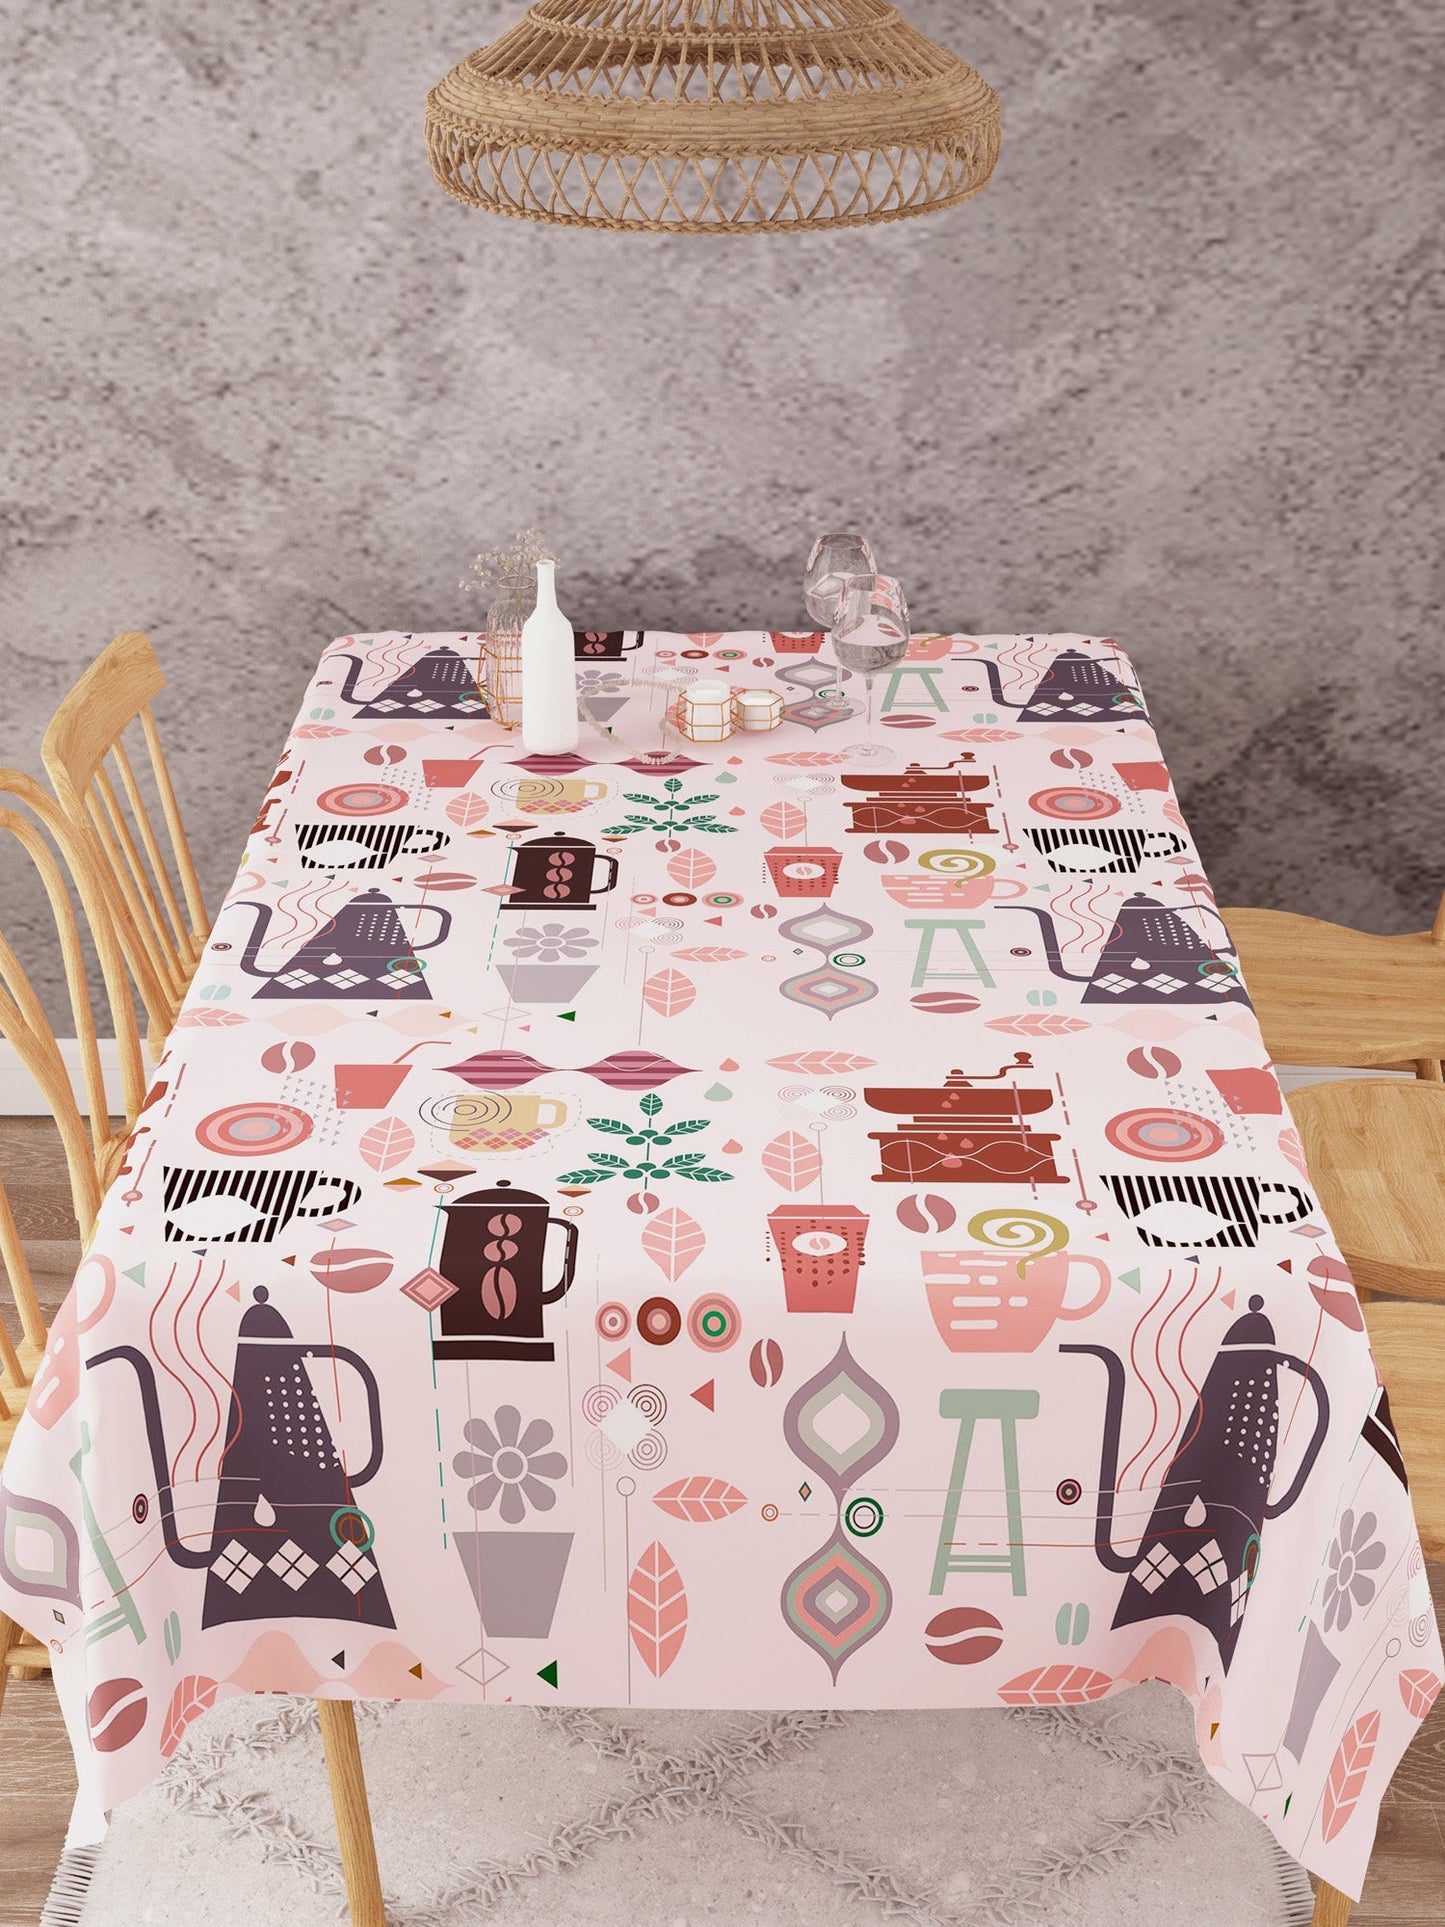 Teaster Printed Peach Colored Cotton Table Cover